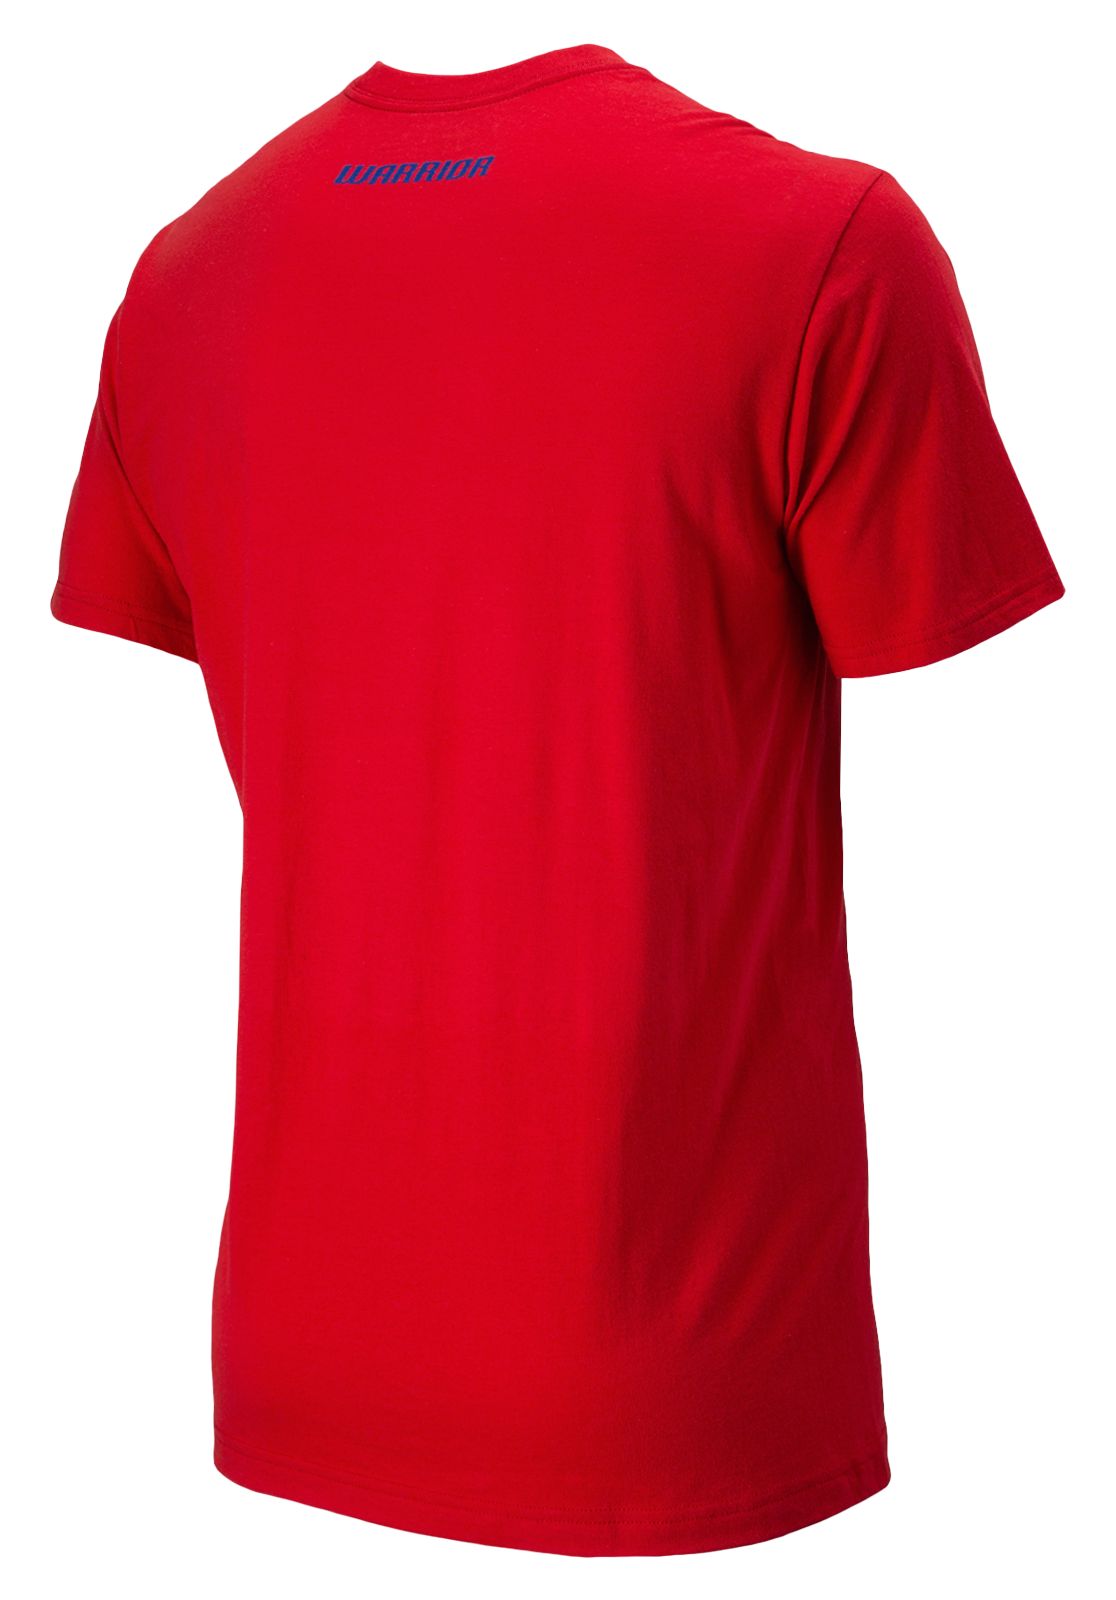 Breakout 50/50 Tee, Formula One Red image number 0